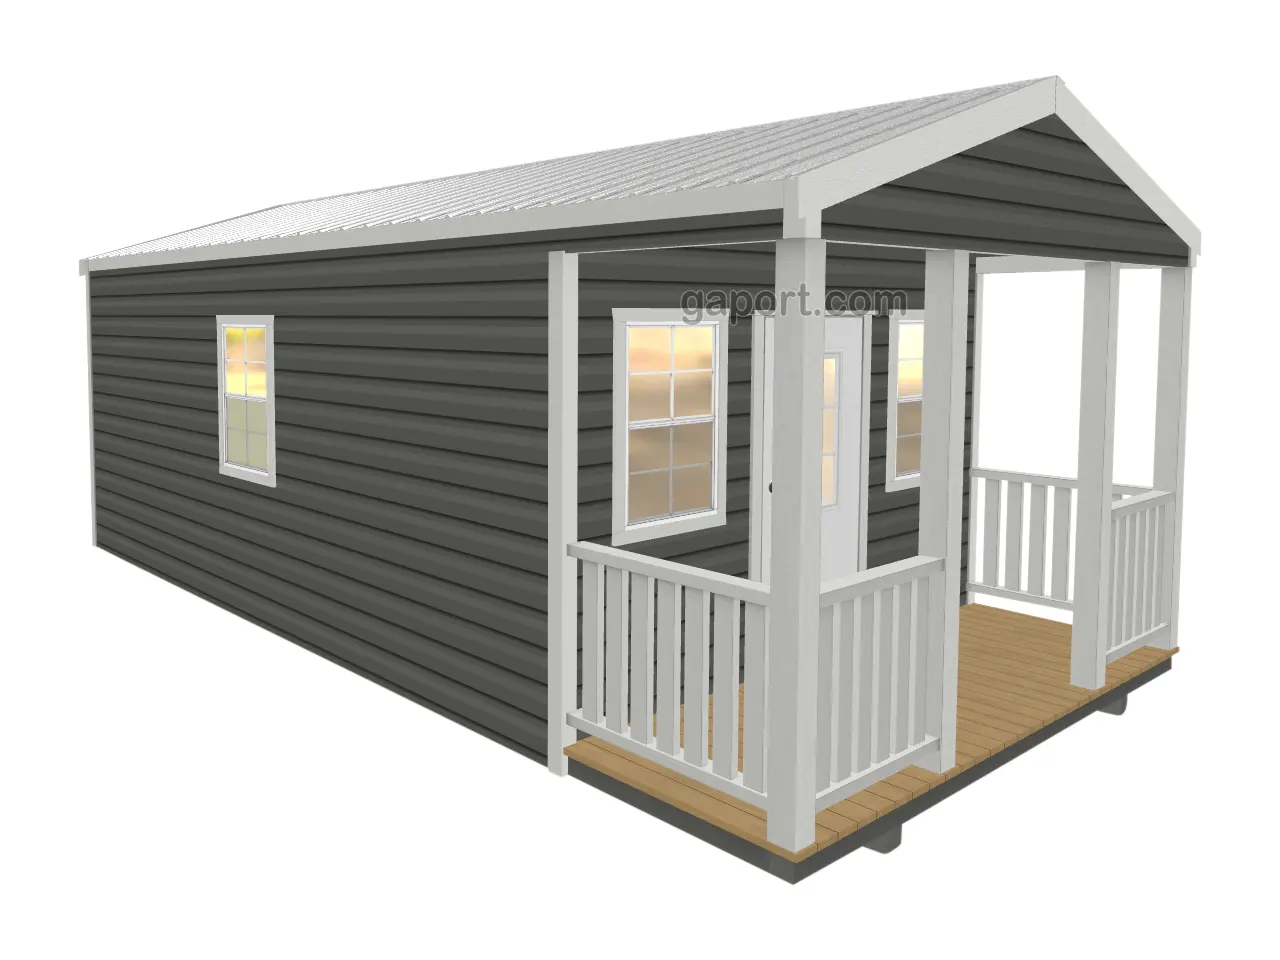 Really nice shed with porch and maximum windows to really make a nice looking shed for your backyard.